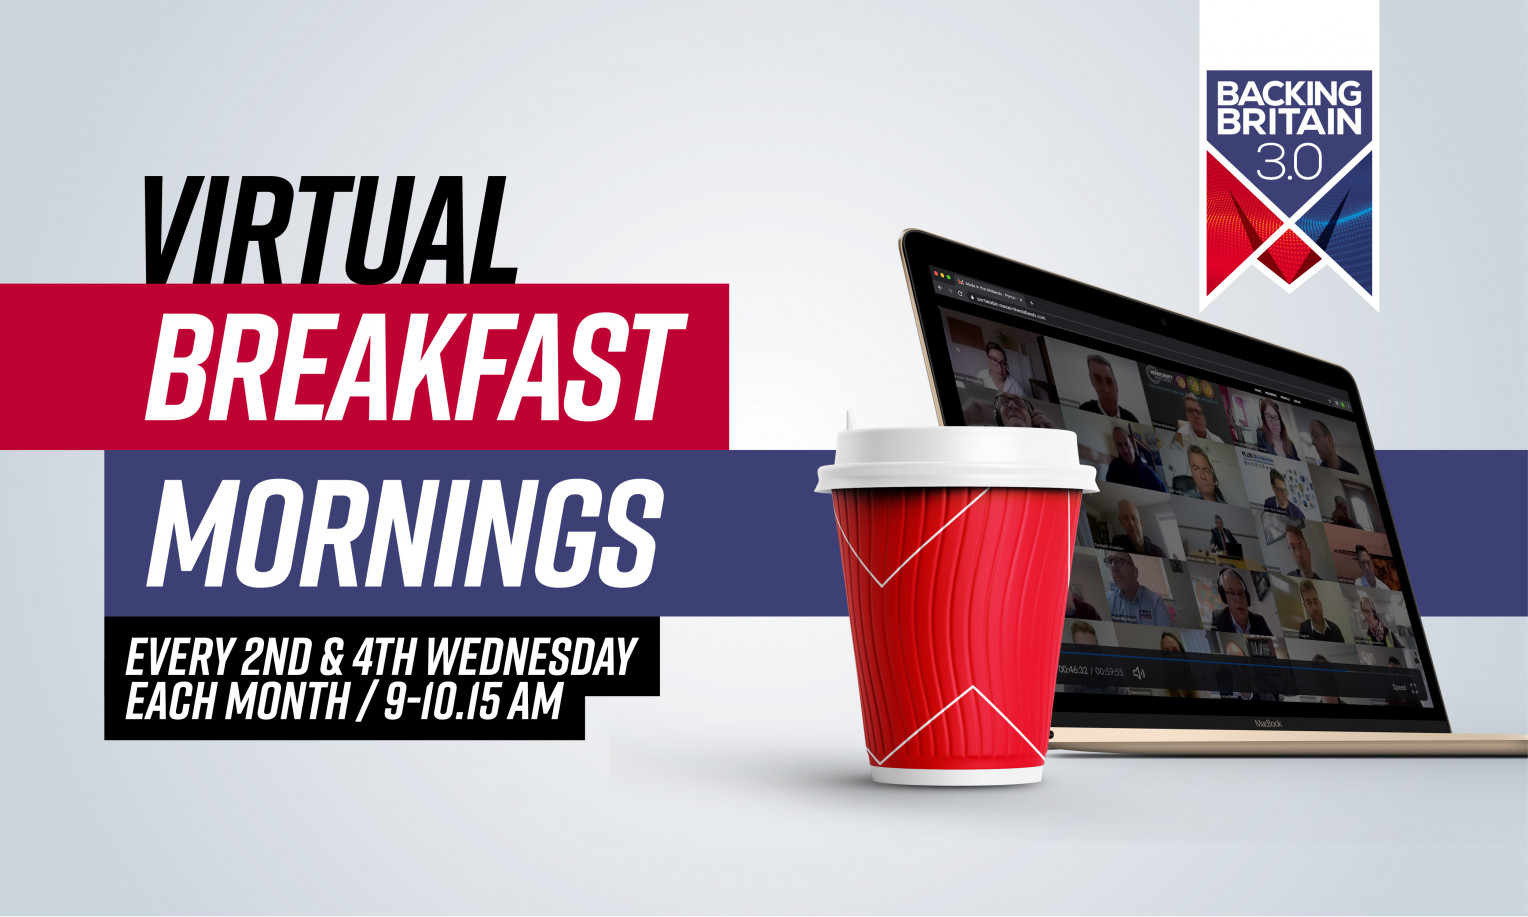 Backing Britain Virtual Breakfast Morning with Schneider Electric, Gardner Aerospace and Boneham and Turner